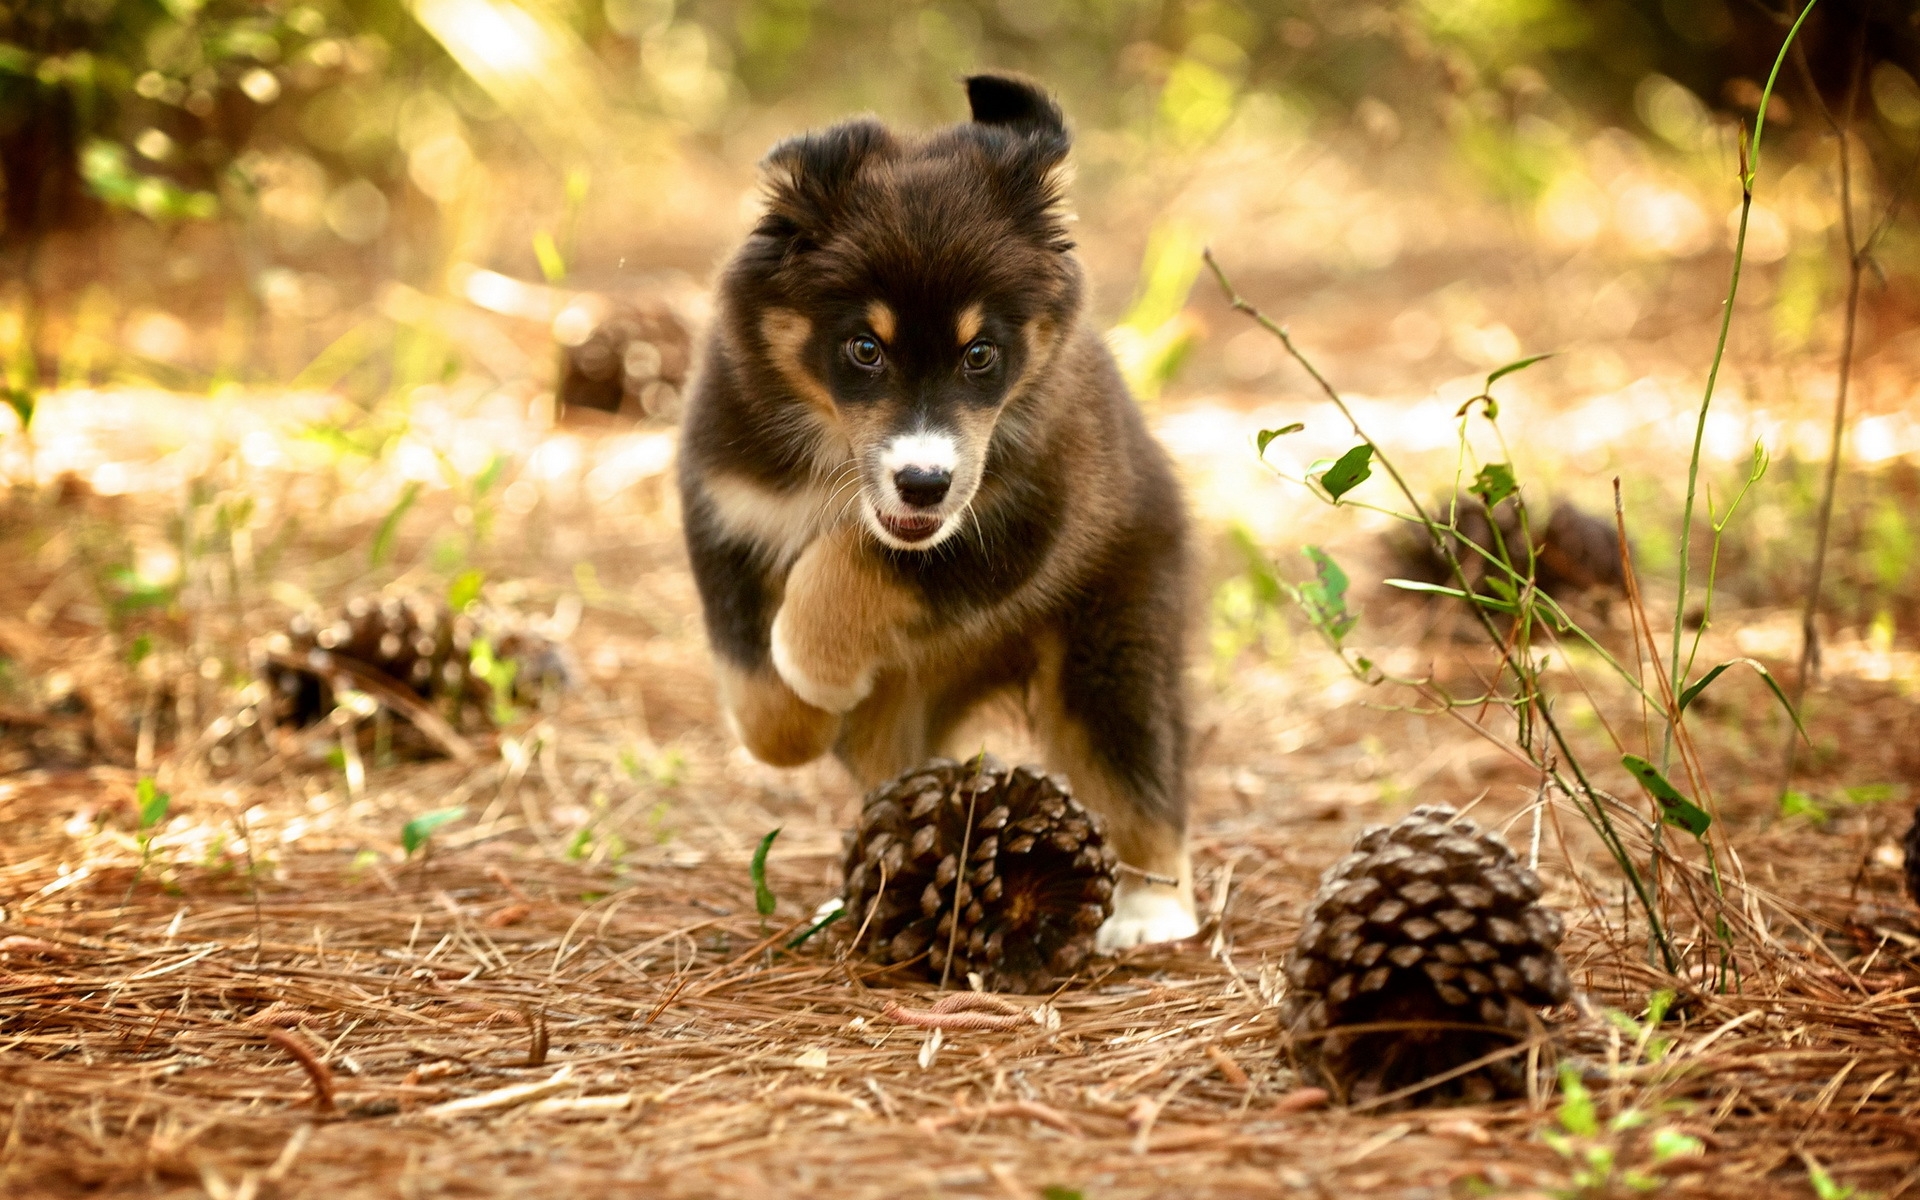 The dog is playing with spruce cones.